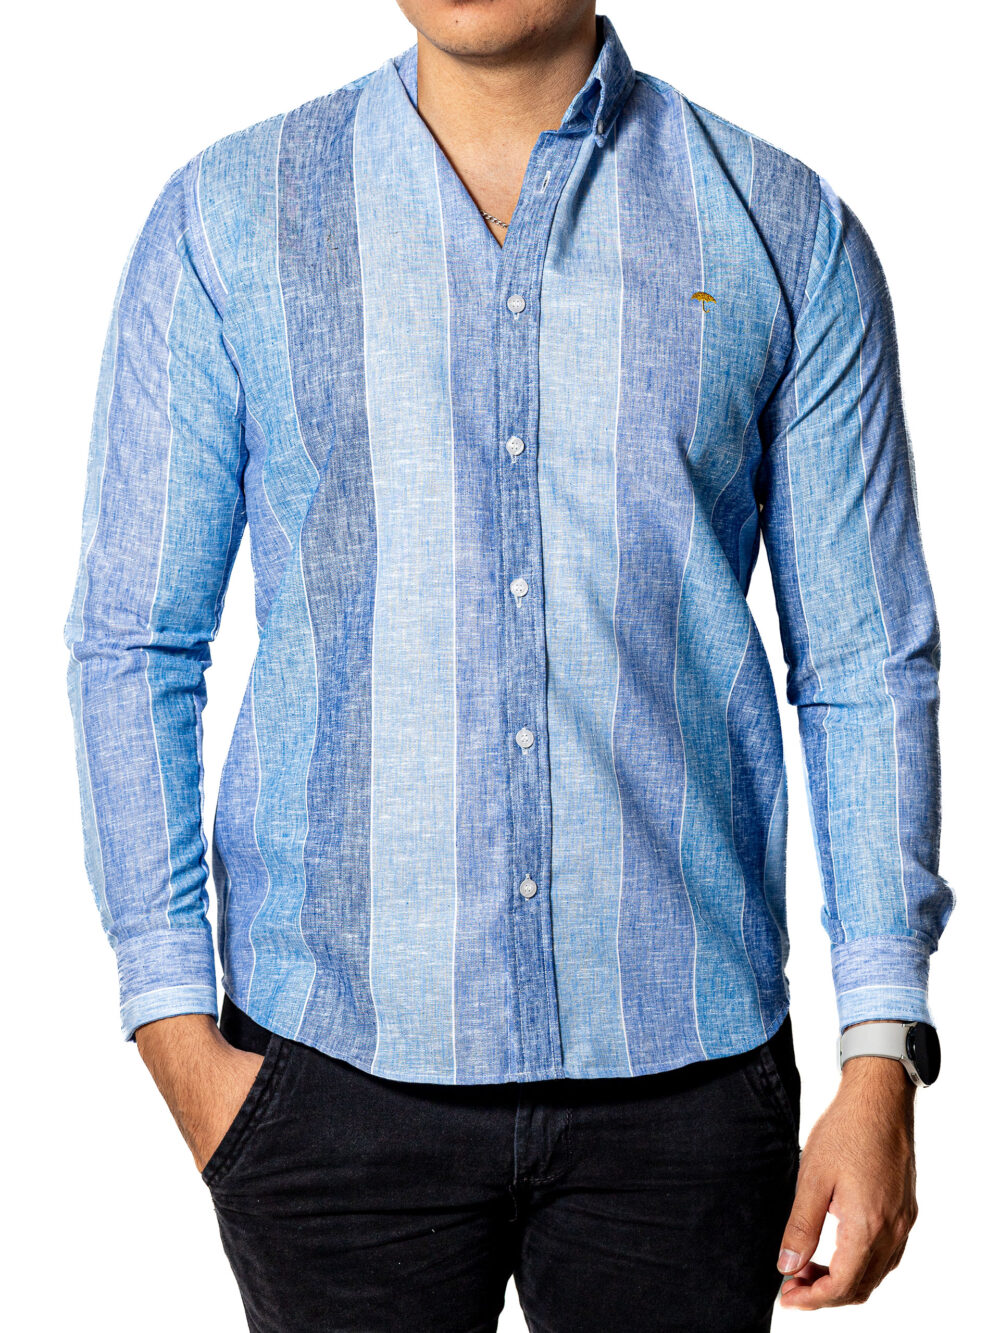 Camisa Hombre Casual Slim Fit Rayas Azules 5